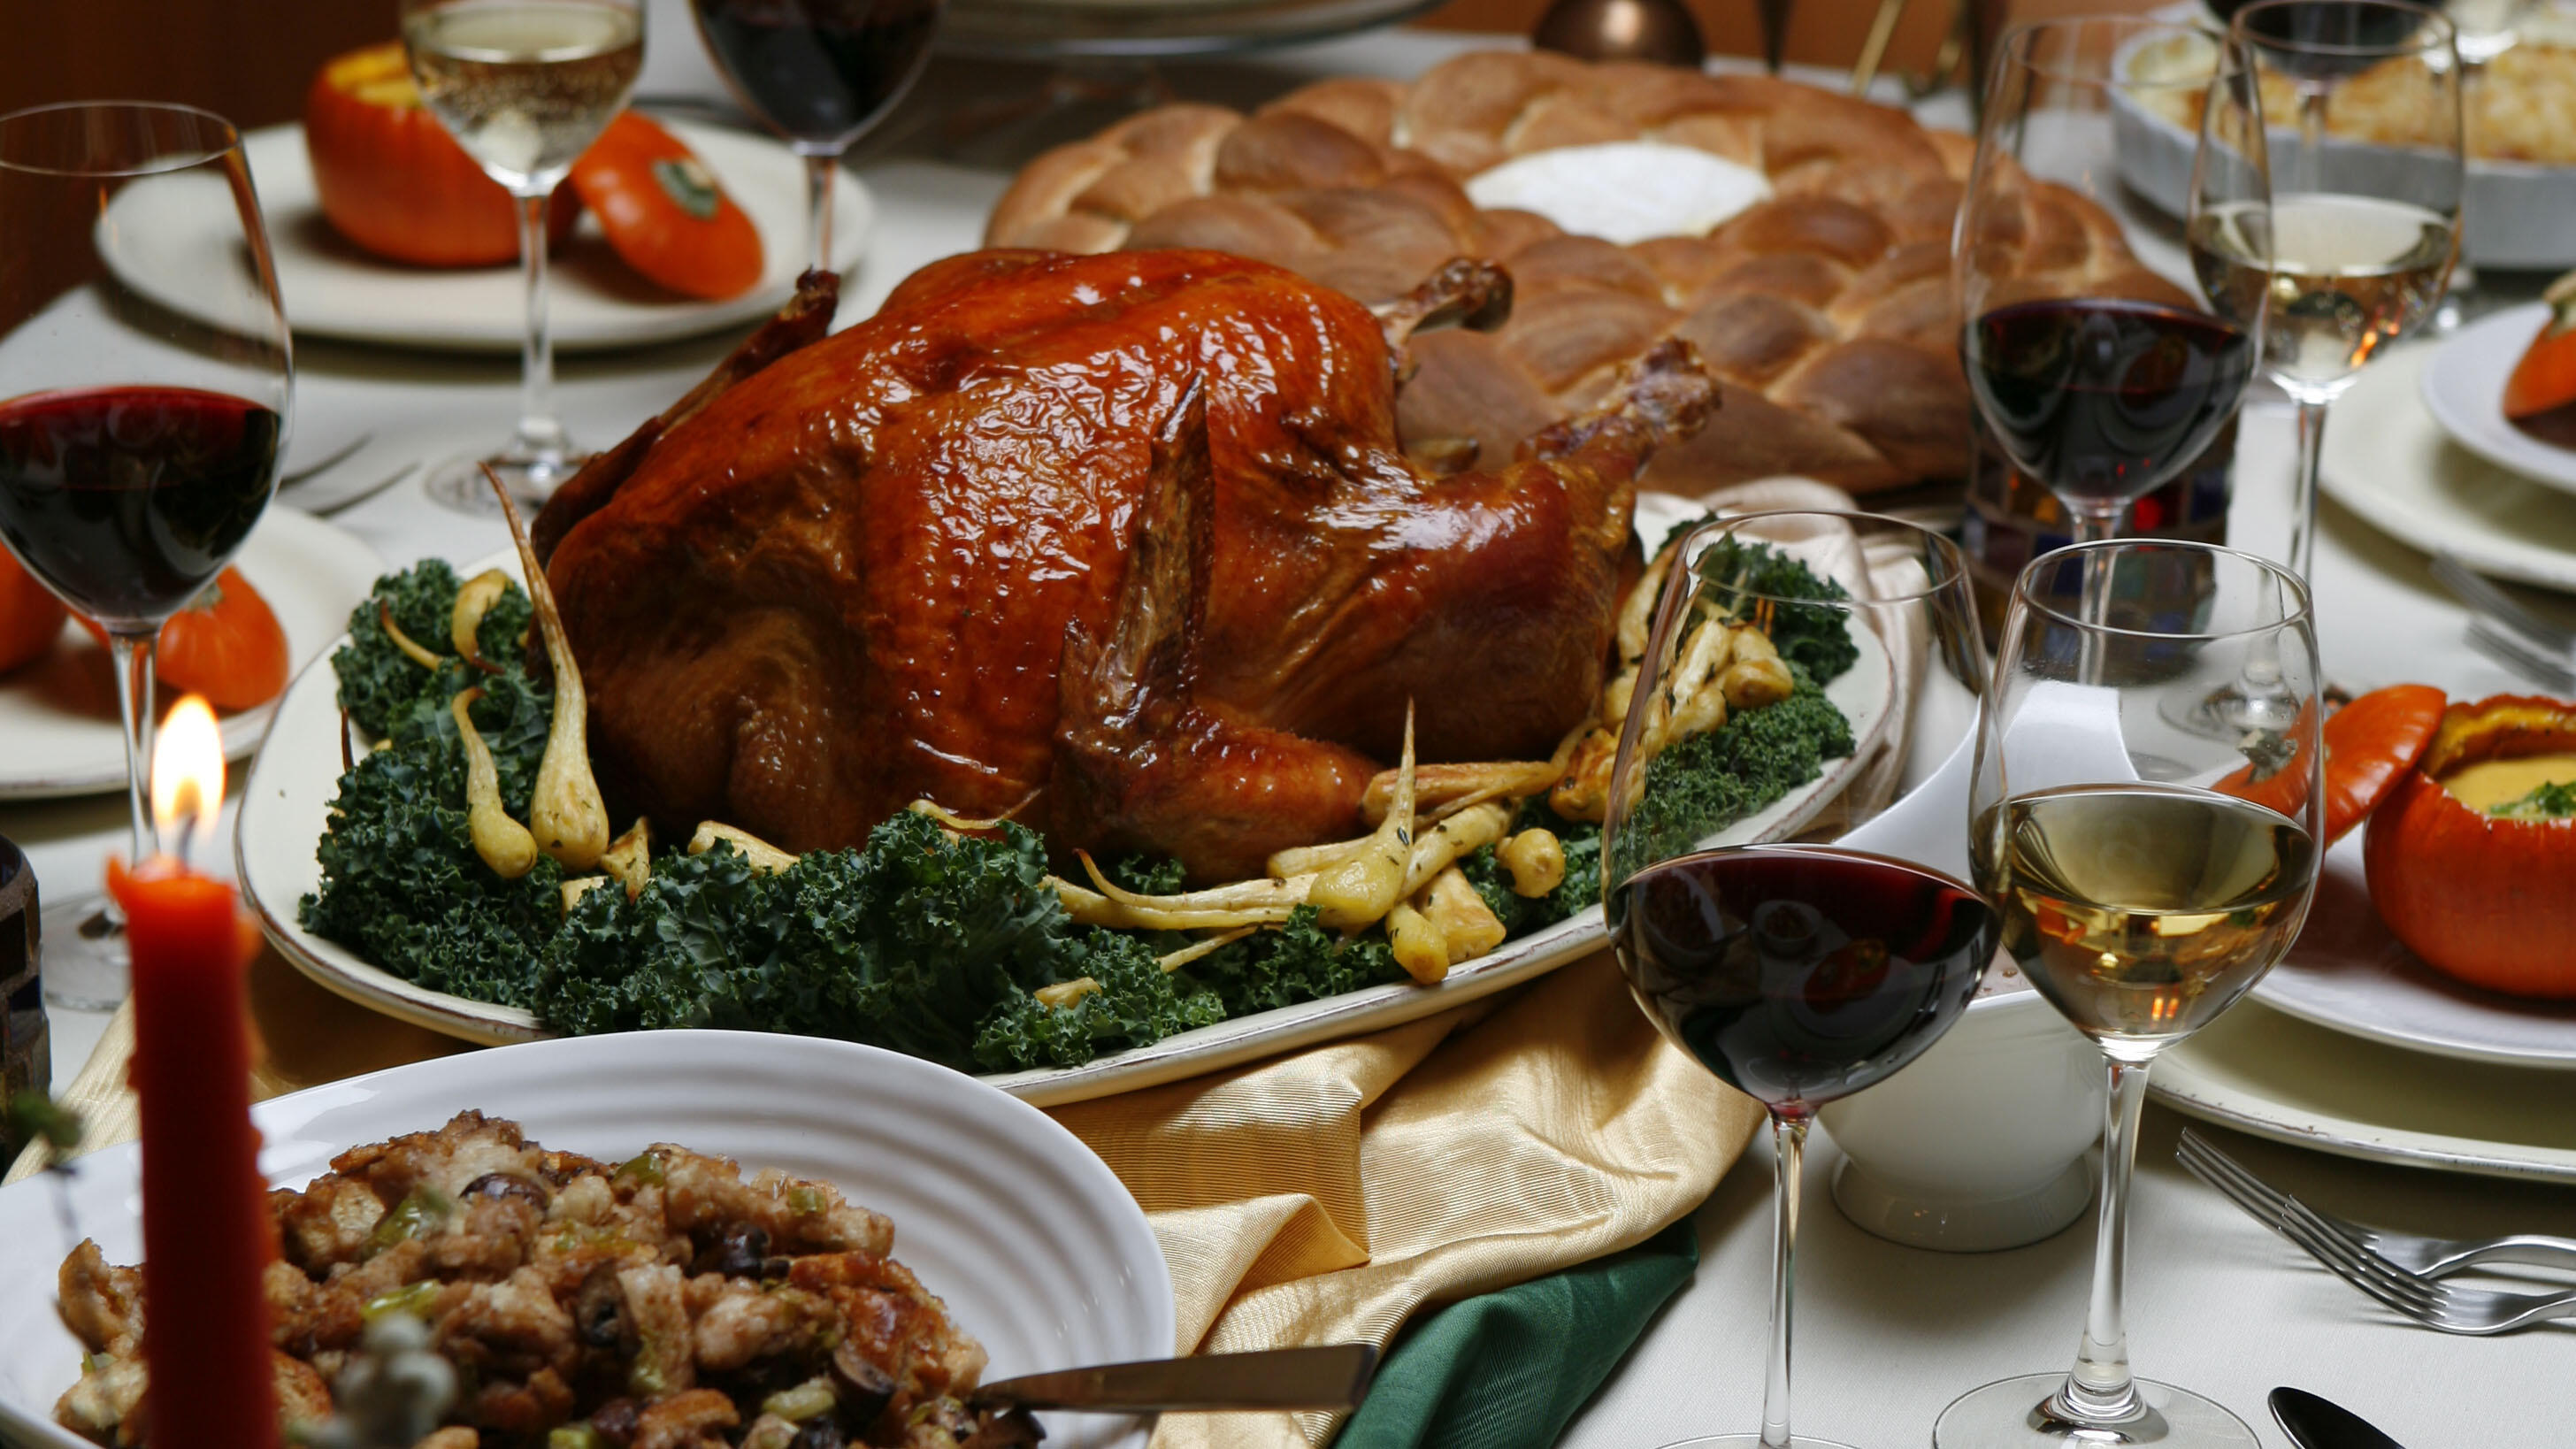 A feast for thanksgiving dinner, photographed in the LAT studio, Friday, Nov. 2, 2007.  (Photo by Jay L. Clendenin/Los Angeles Times via Getty Images)